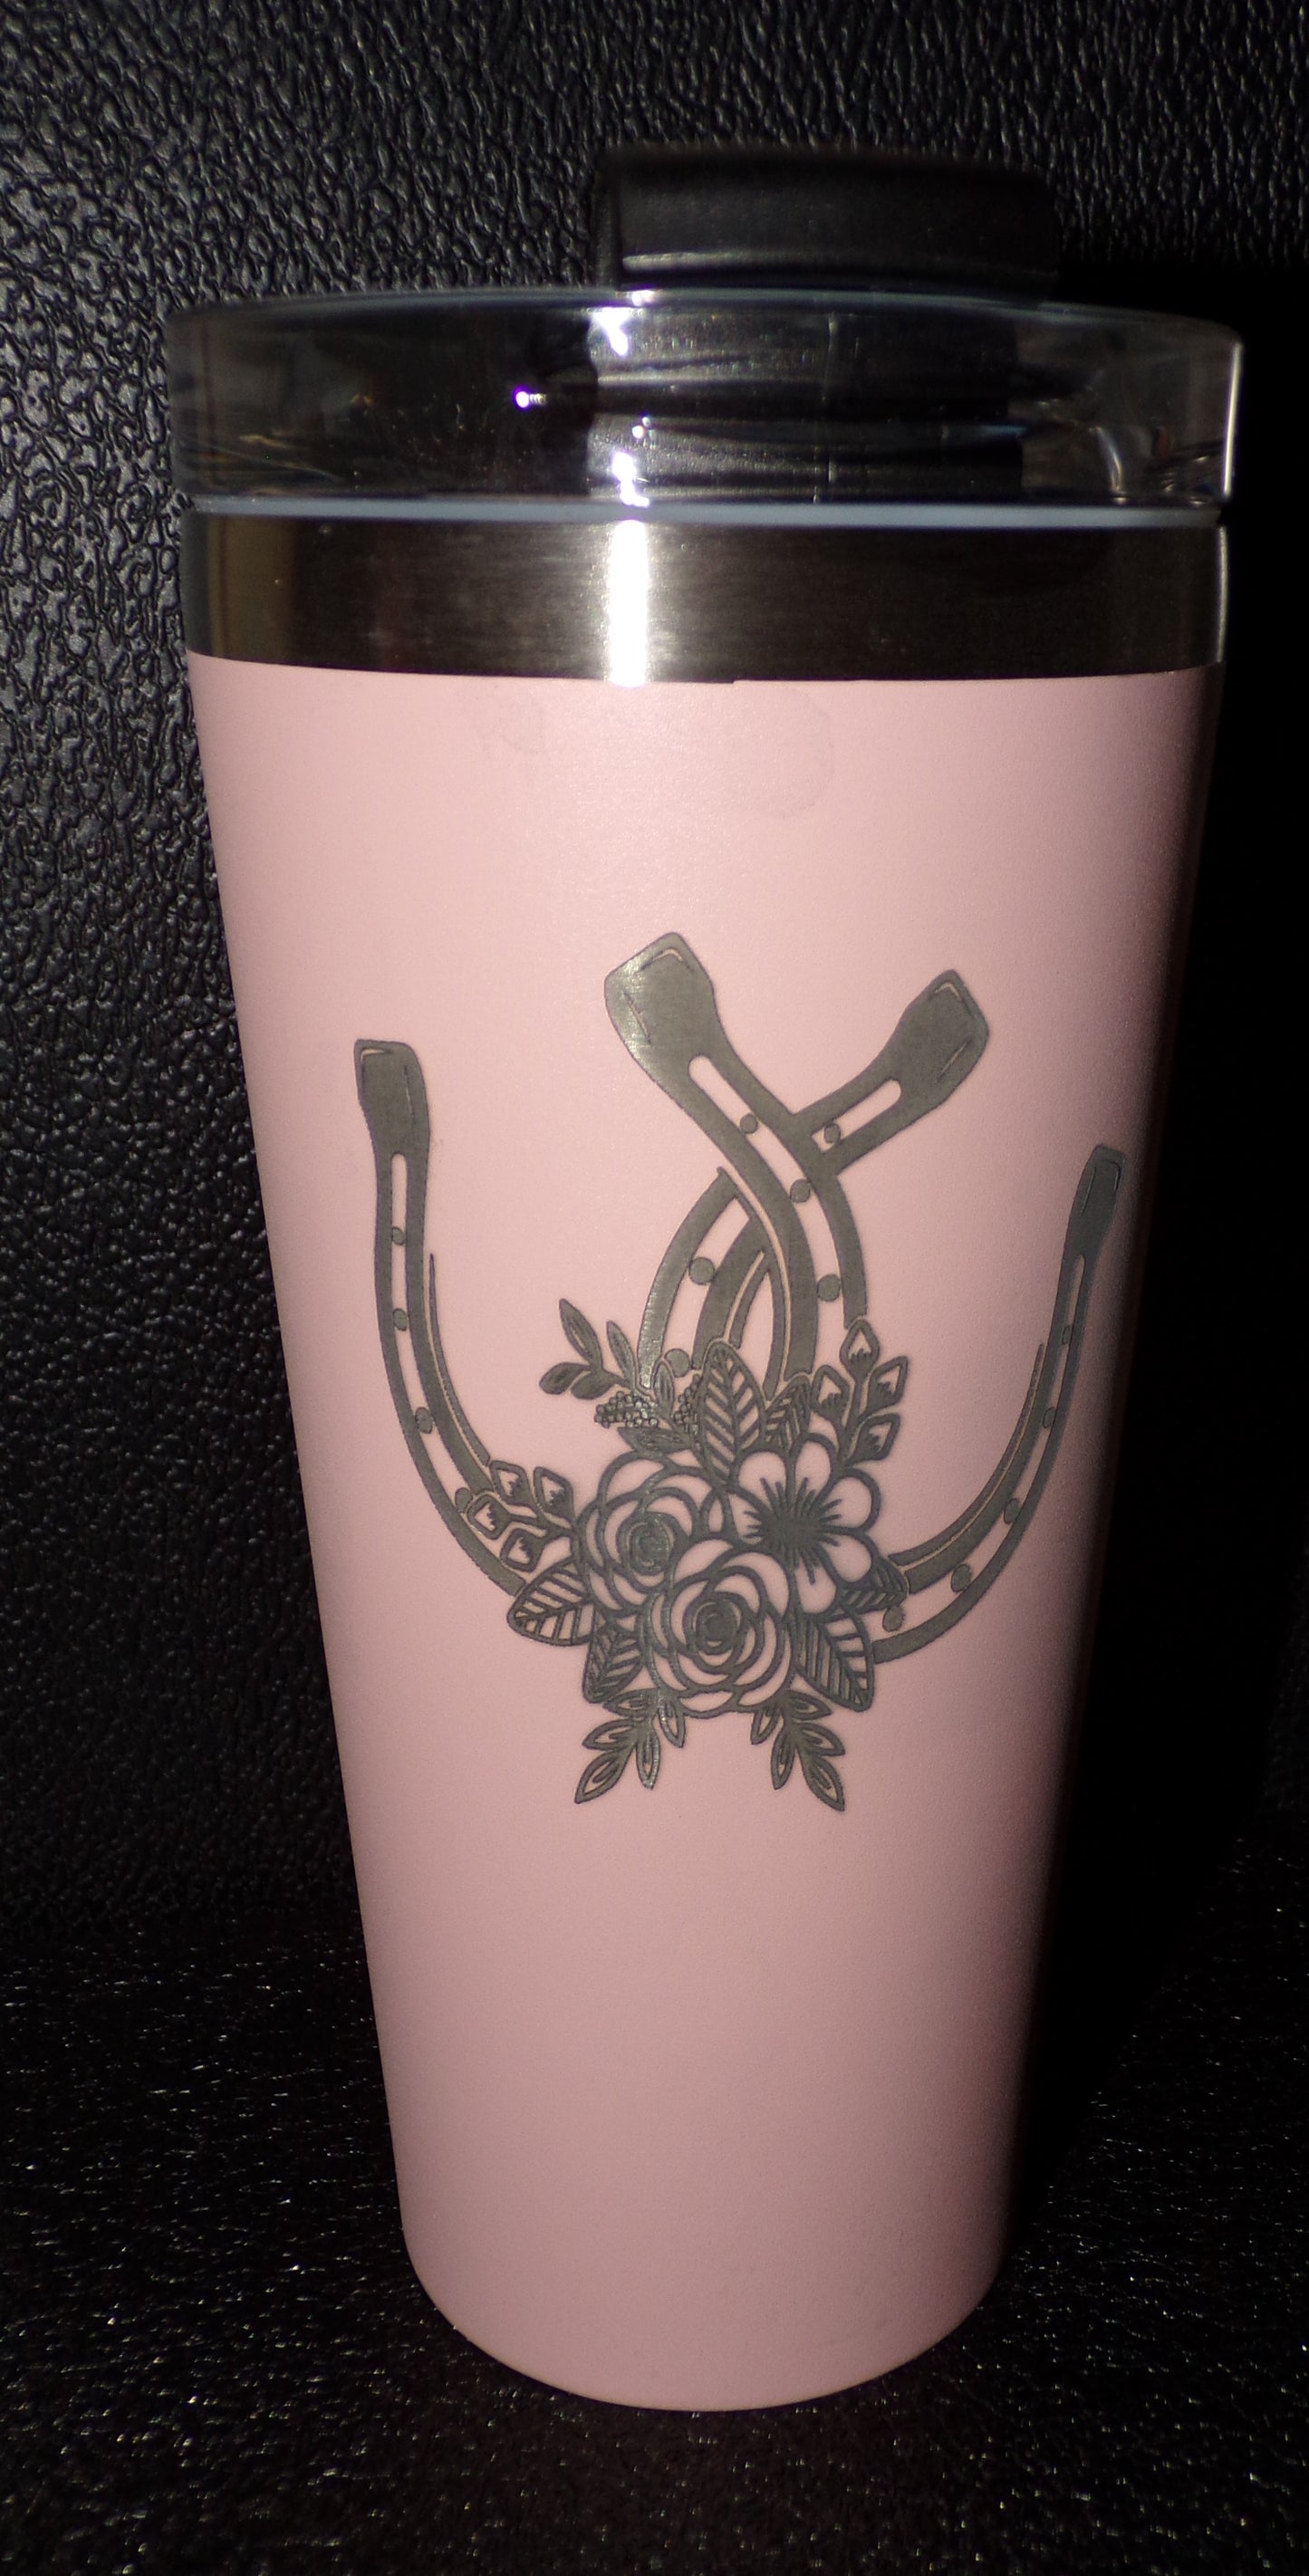 22oz Tumbler / Coffee Mug with lid Engraved Horseshoes and flowers